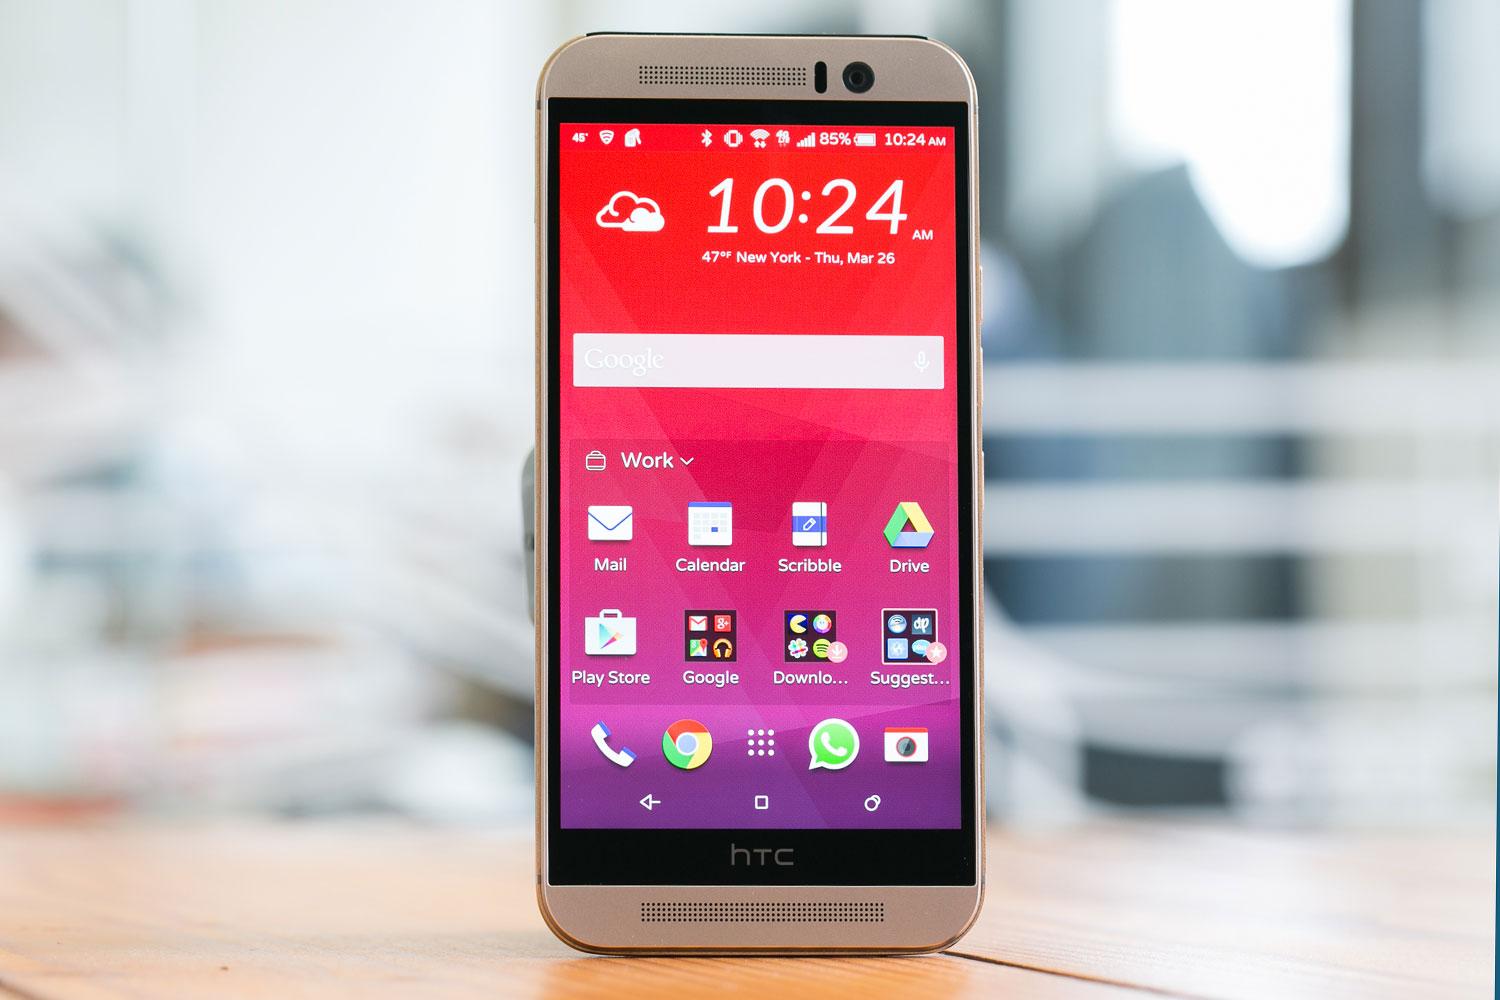 HTC One M9 home